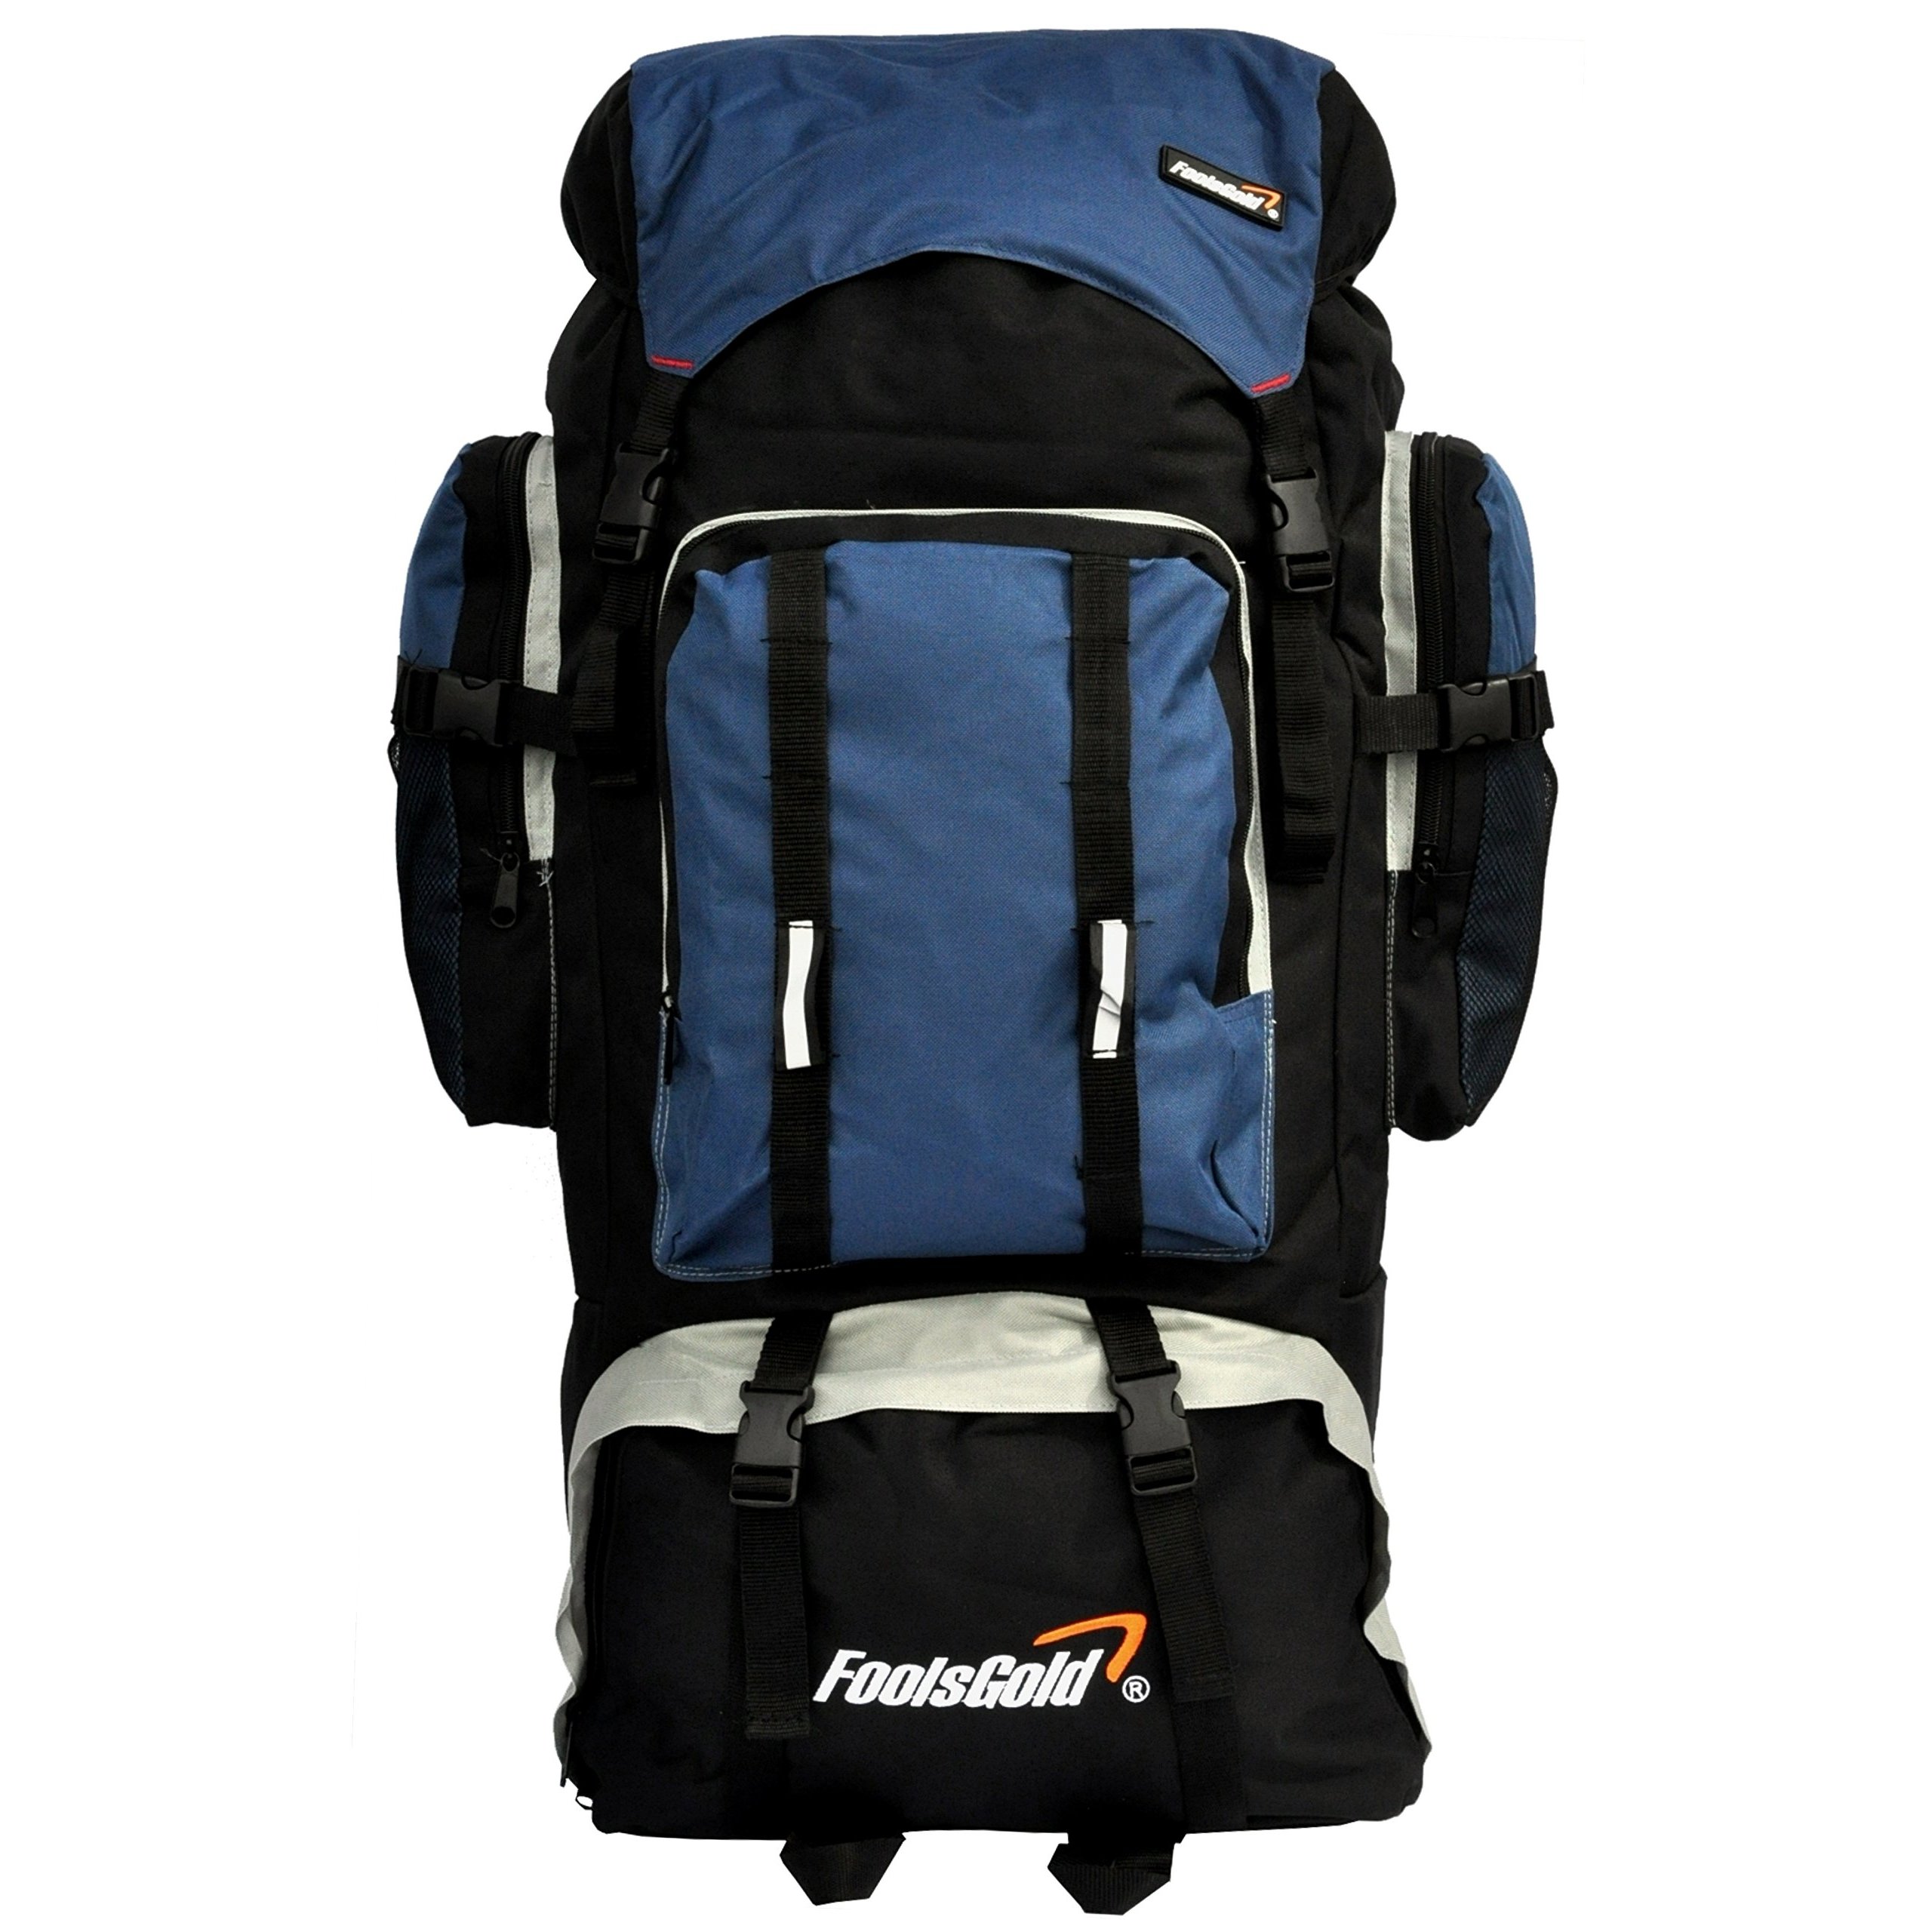 foolsGold Extra Large Hiking Travel Backpack Camping Rucksack Top and Bottom Loading (Navy)